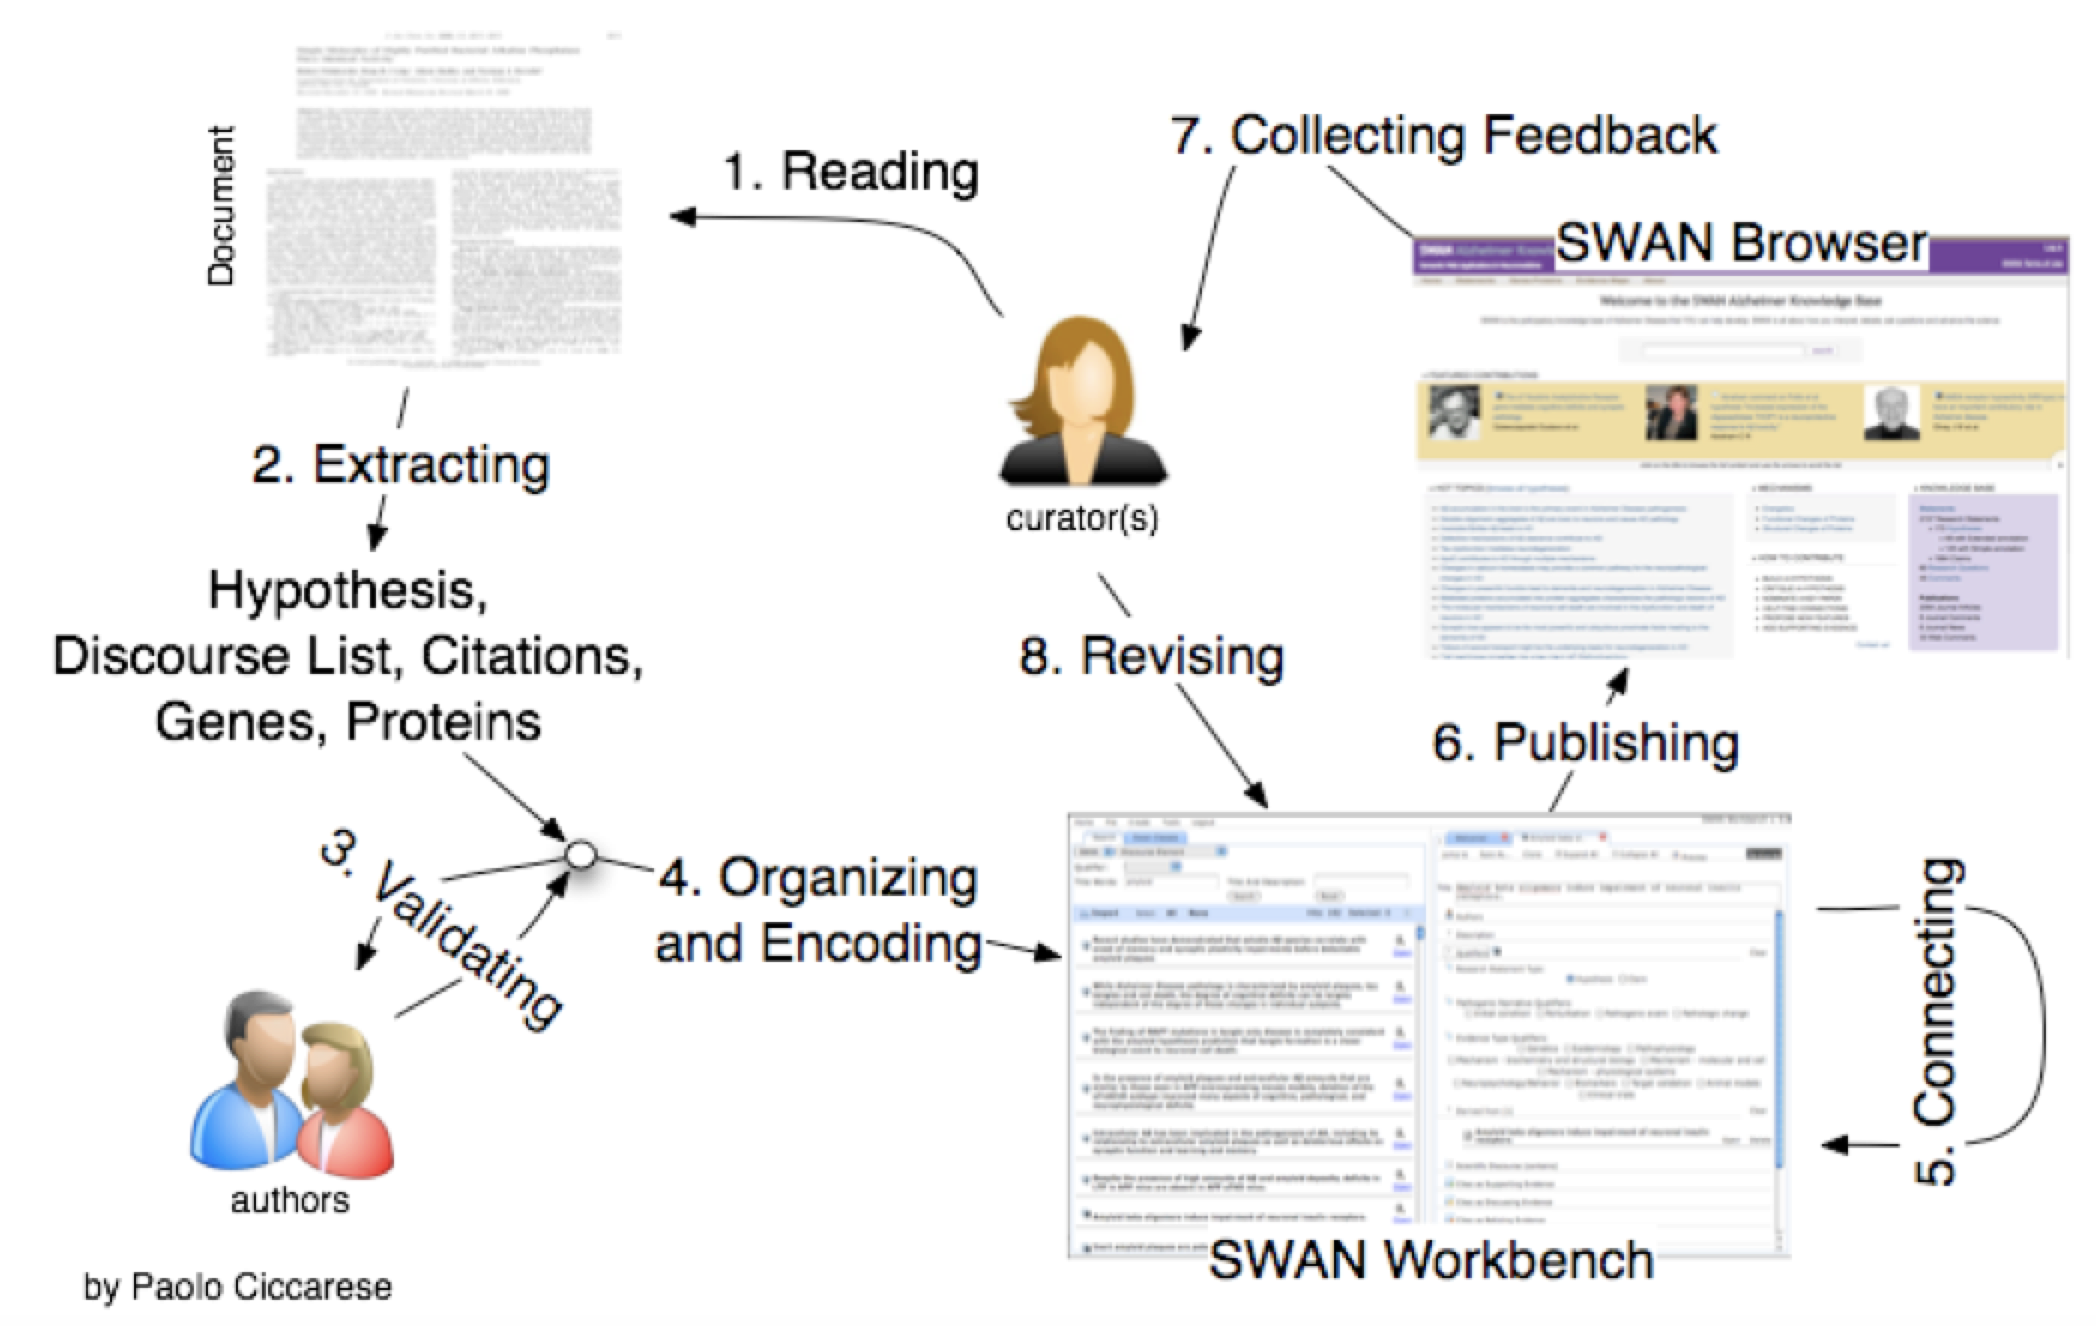 SWAN curation process by Dr. Paolo Ciccarese